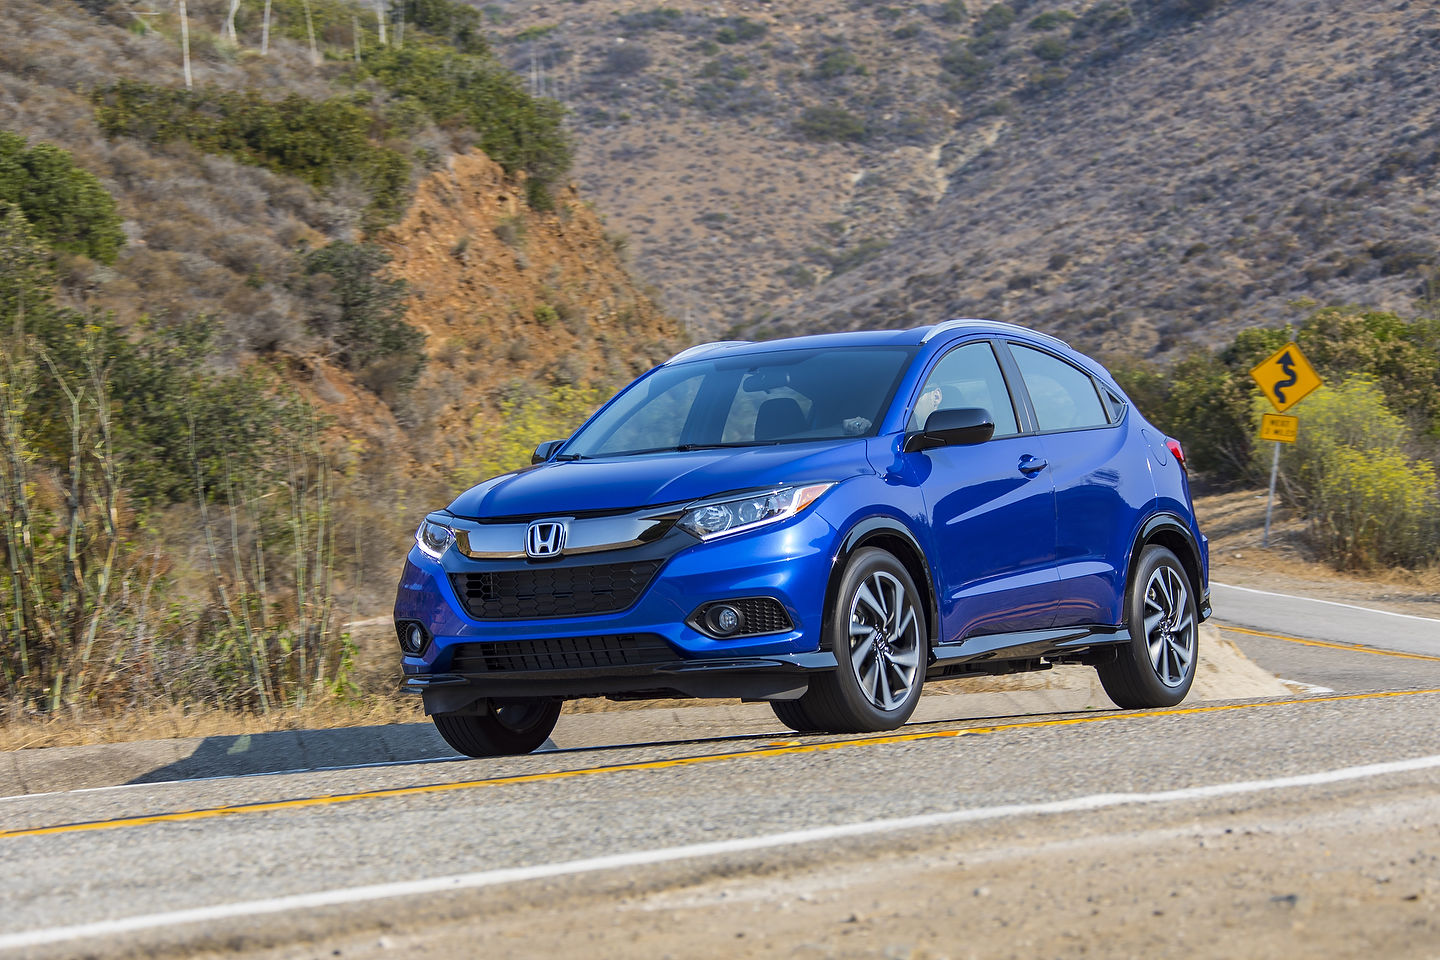 Three things that set the 2019 Honda HR-V apart from the Toyota C-HR